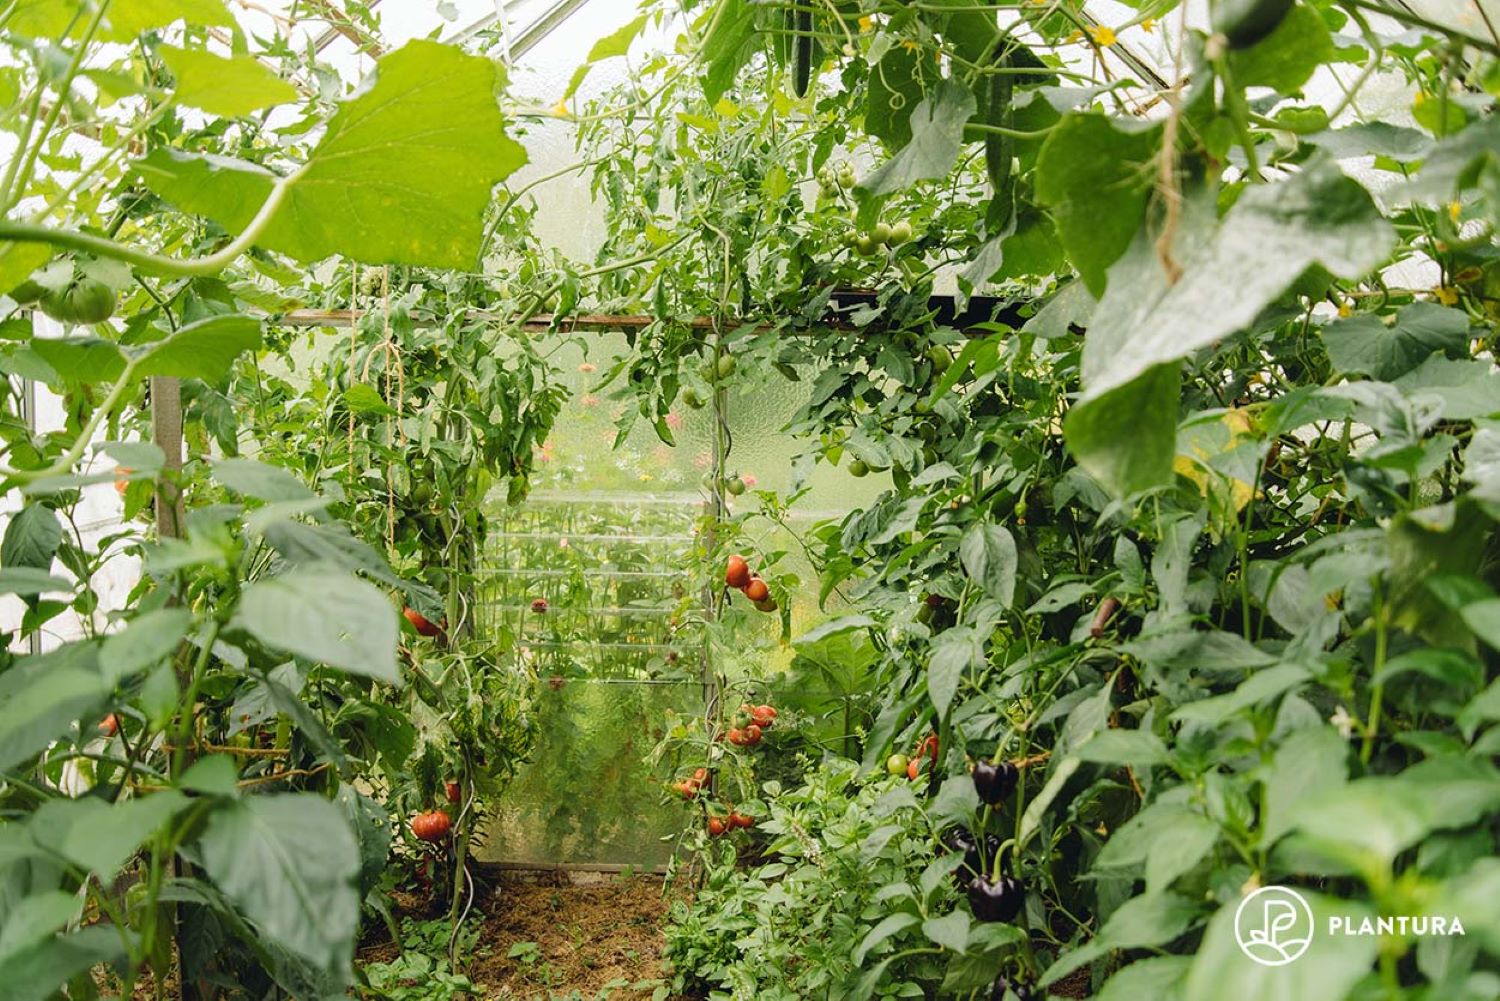 Growing tomatoes in greenhouses: when & how - Plantura